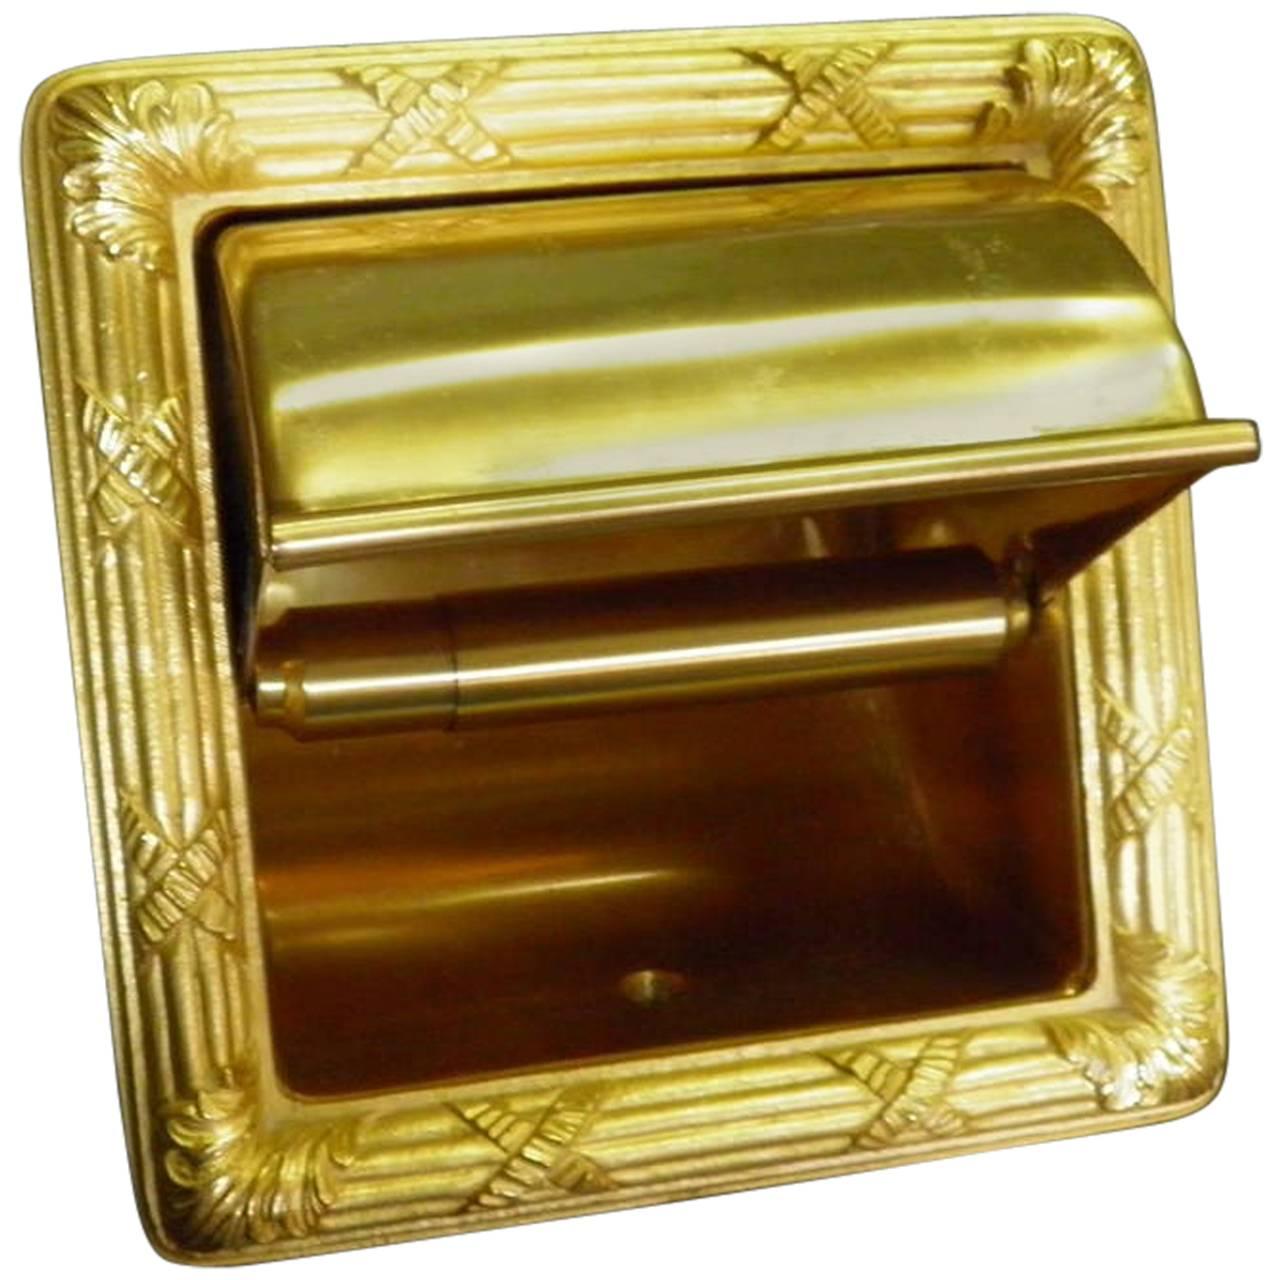 Luxe Sherle Wagner 22-Karat Gold-Plated Recessed Toilet Tissue Holder-Like New For Sale